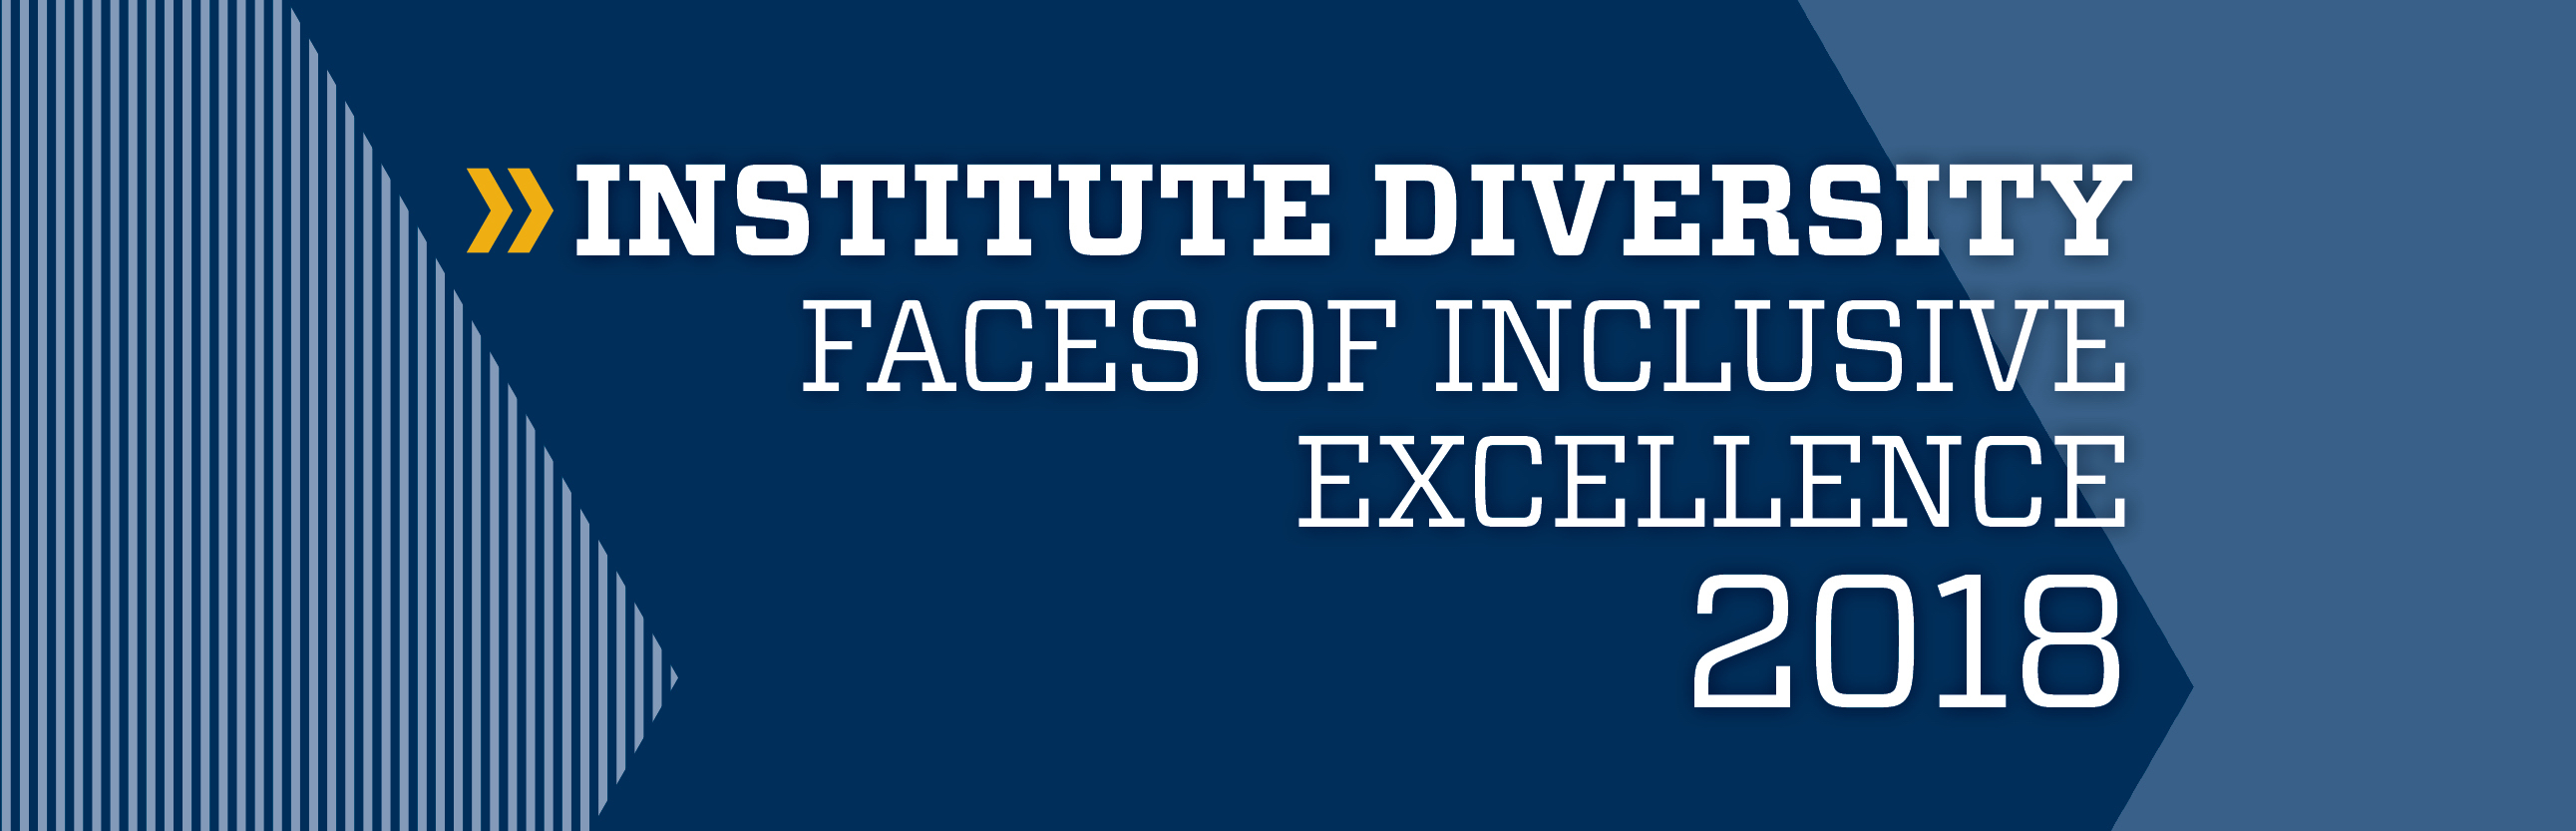 This year’s Faces of Inclusive Excellence publication and video will recognize deserving faculty, staff, and students at the 10th Annual Diversity Symposium on September 5, 2018.